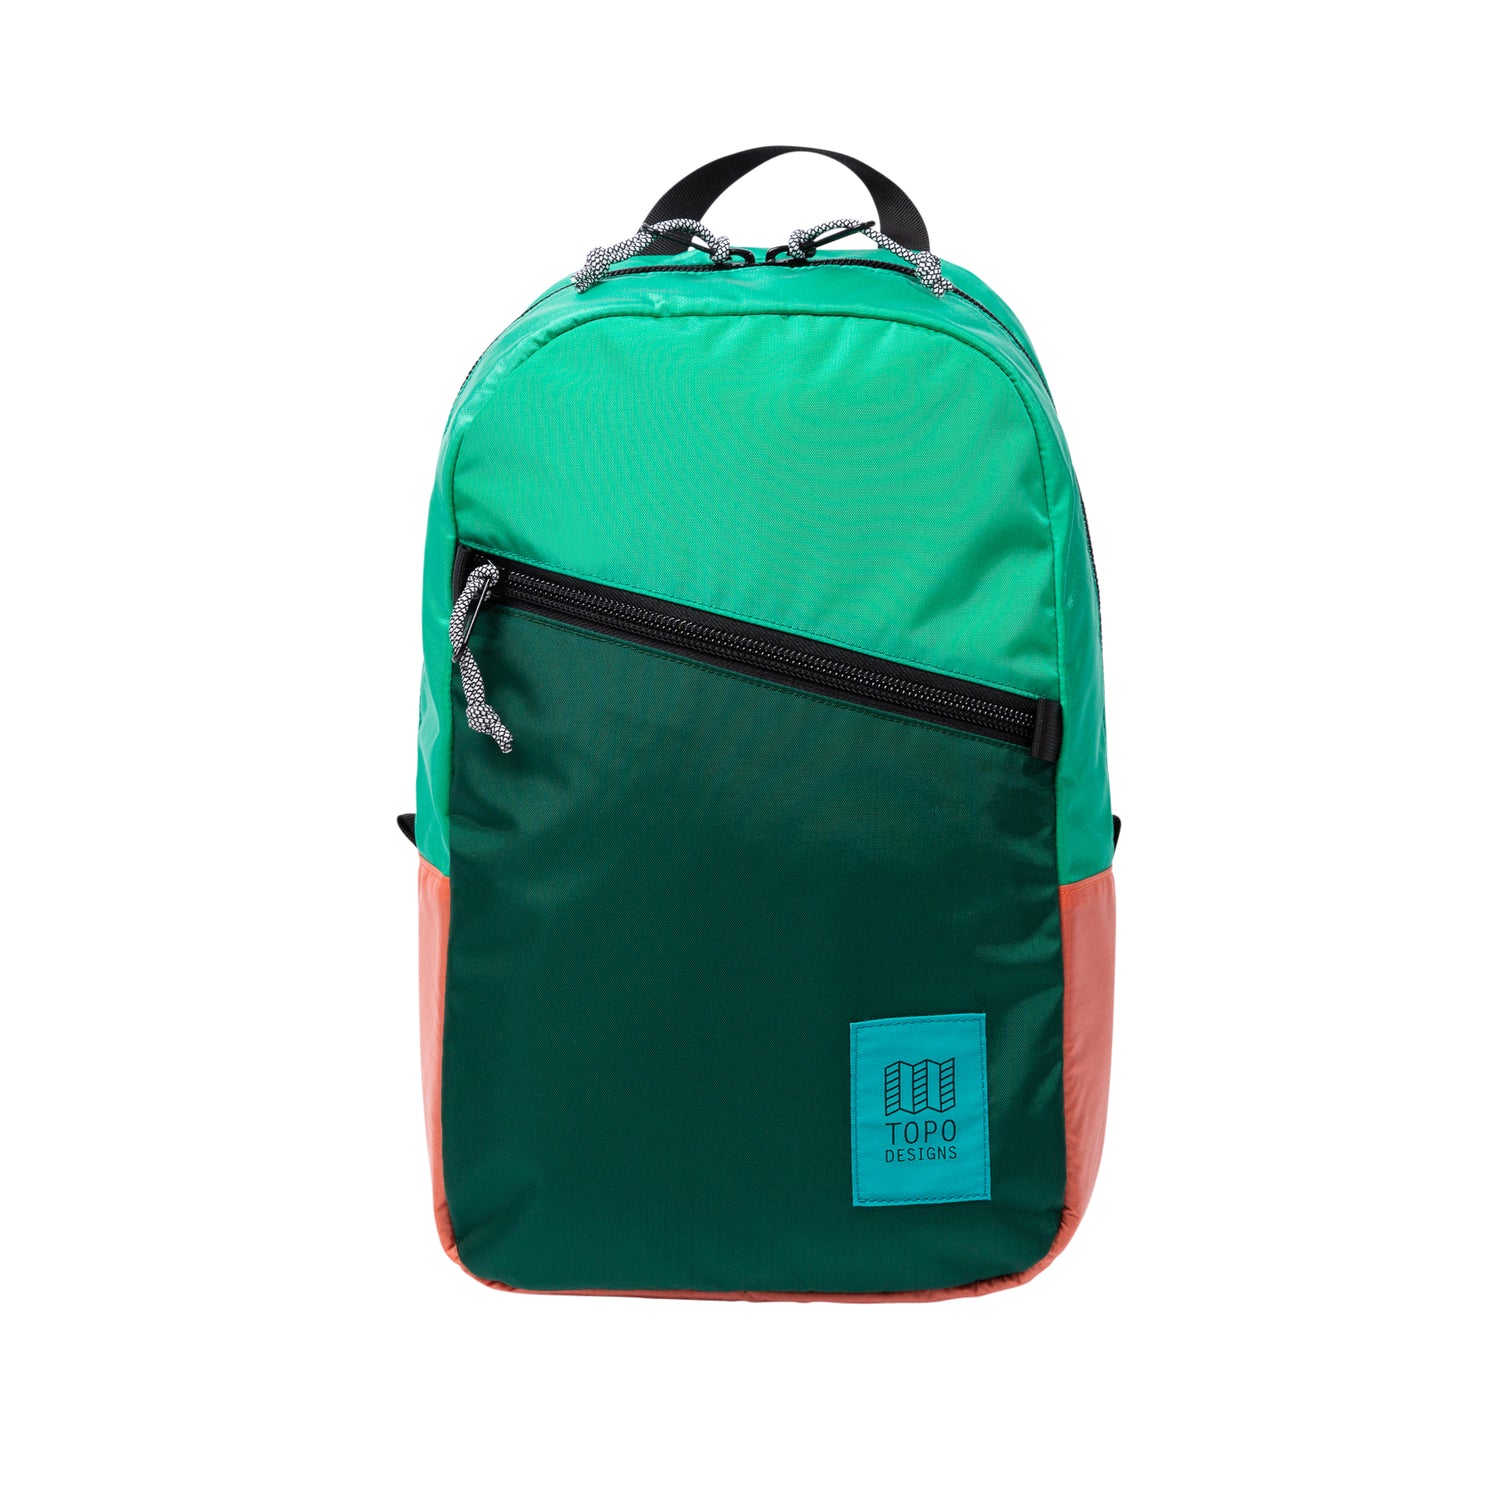 Topo Designs Light Pack - Mint/Forest/Coral